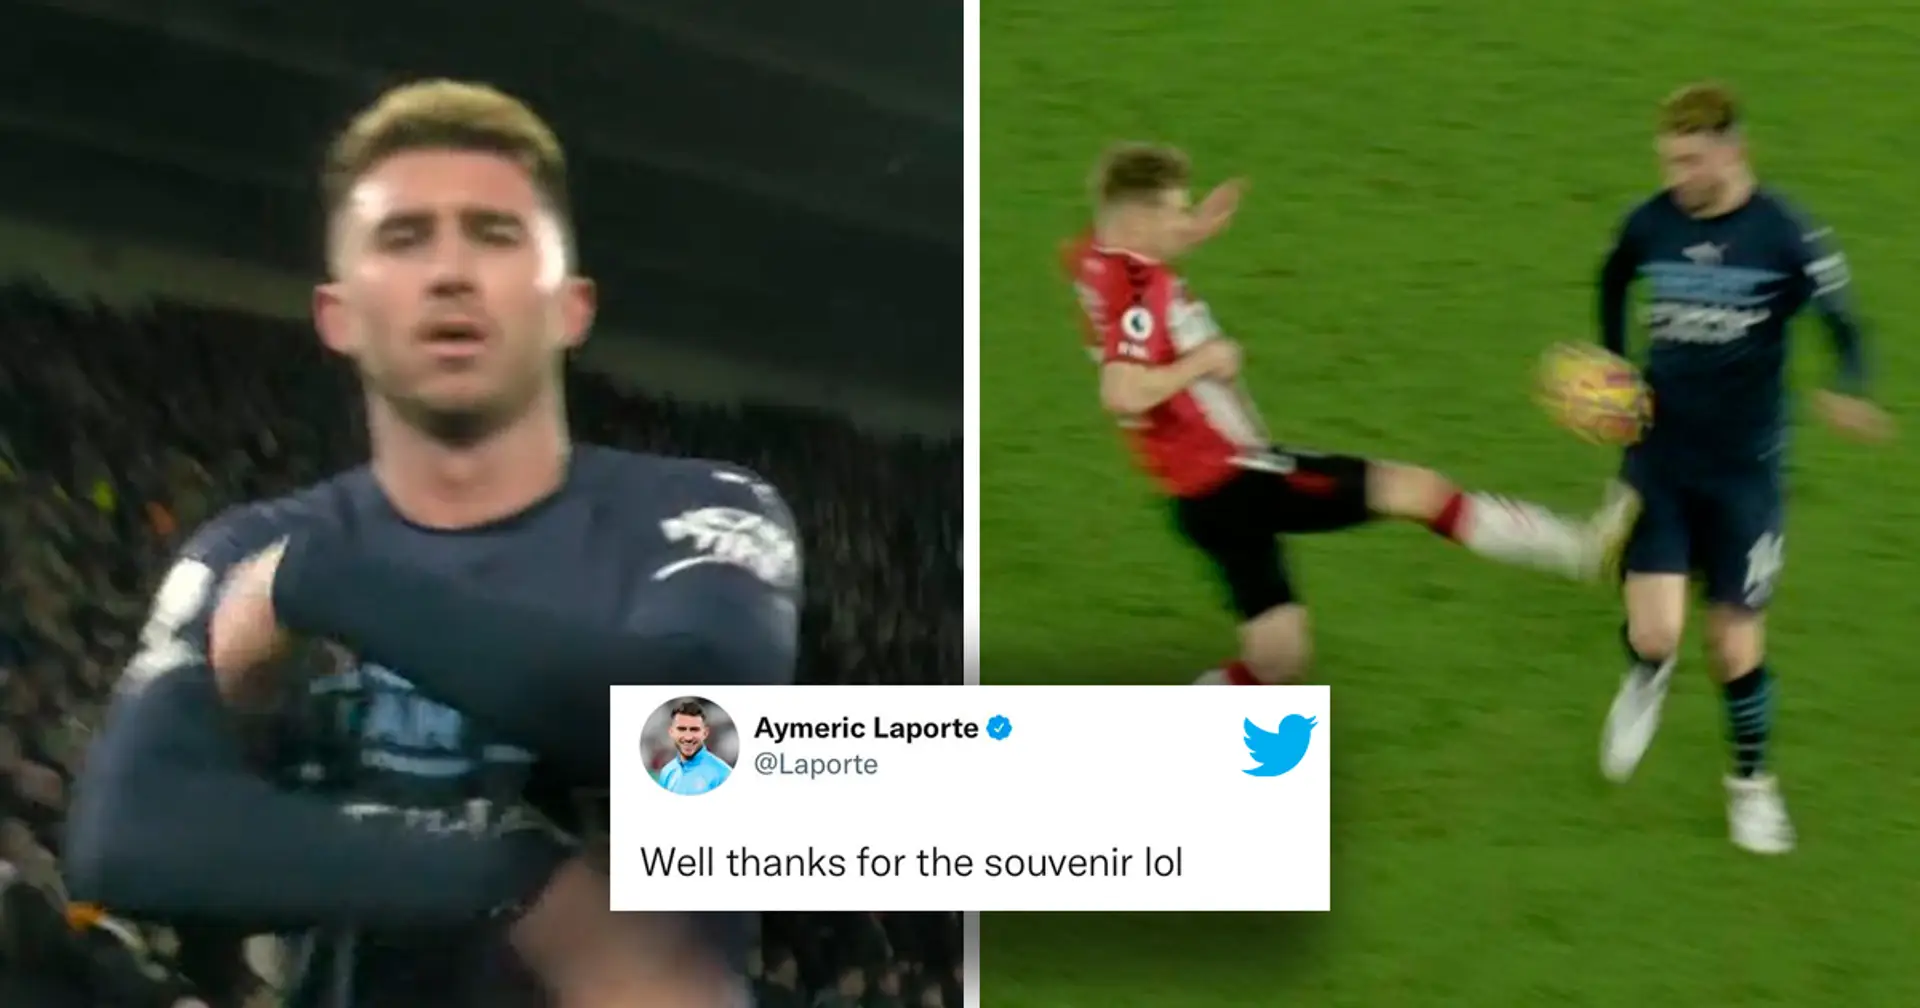 Aymeric Laporte shows off a horrible gash on his leg after Stuart Armstrong’s tackle